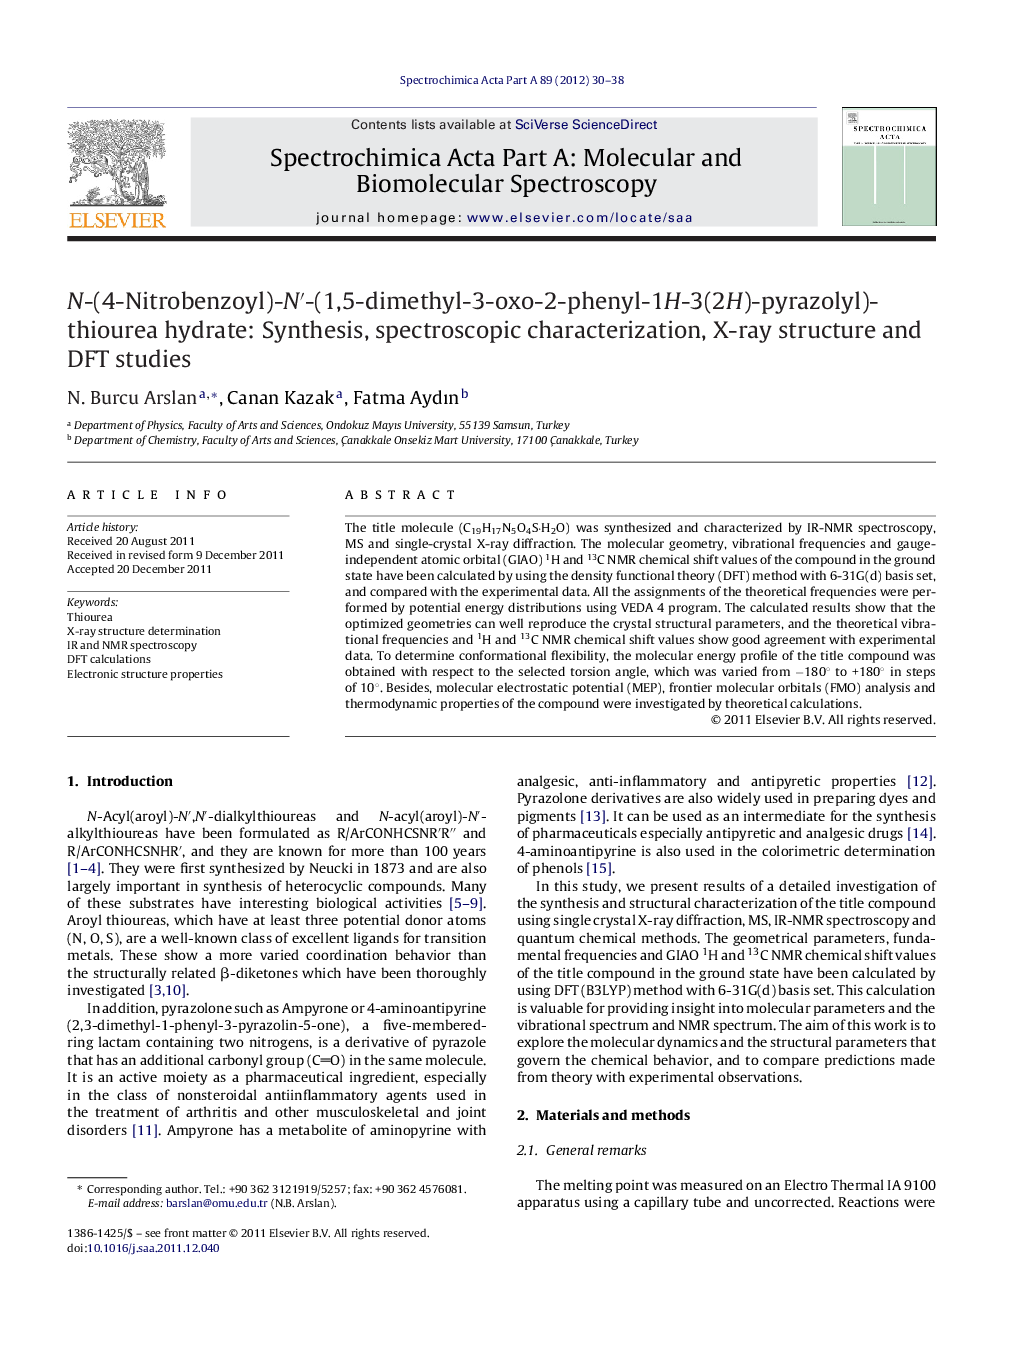 N-(4-Nitrobenzoyl)-N′-(1,5-dimethyl-3-oxo-2-phenyl-1H-3(2H)-pyrazolyl)-thiourea hydrate: Synthesis, spectroscopic characterization, X-ray structure and DFT studies